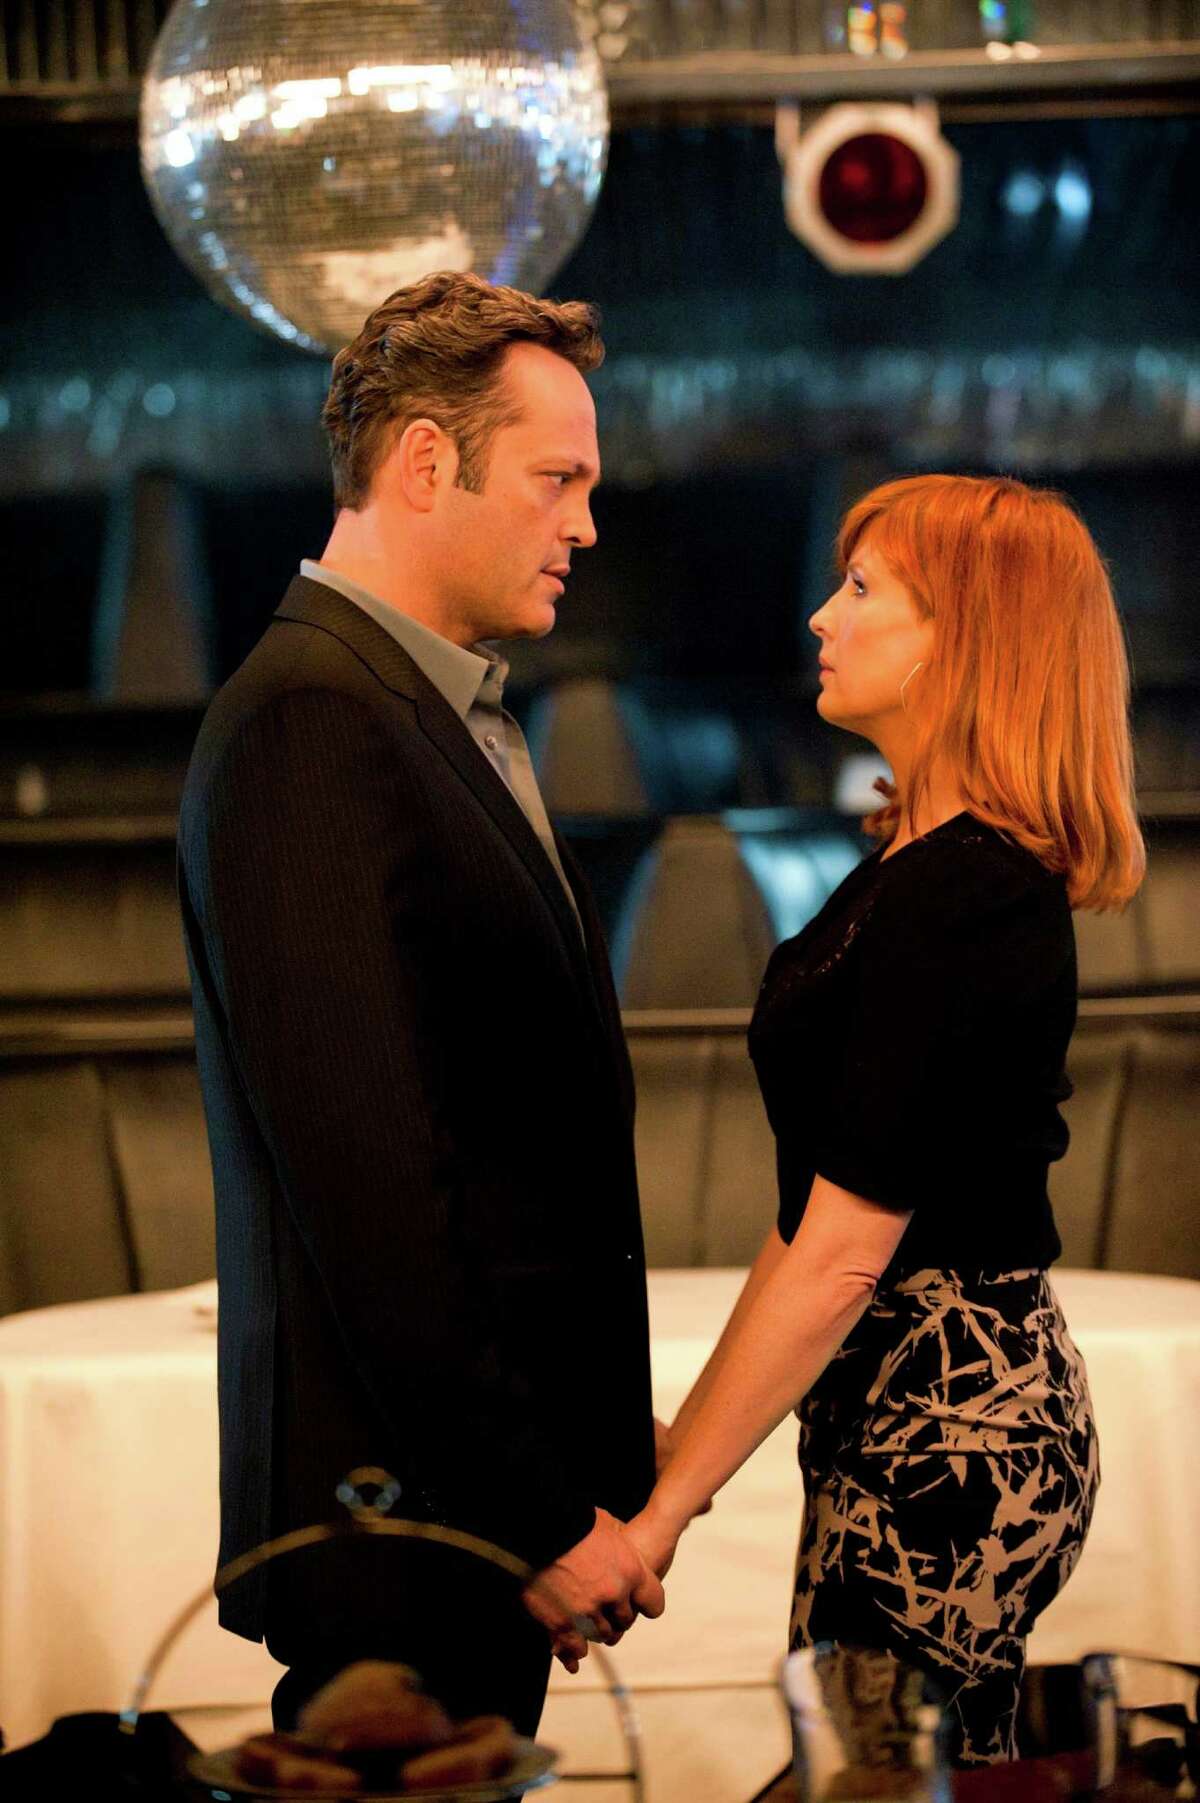 Vince Vaughn portrays Frank, a criminal attempting to go legit, and Kelly Reilly plays is wife, Jordan, a failed actress who is a full partner in his enterprises and ambitions in season two of HBO's 'True Detective.' June, 2015